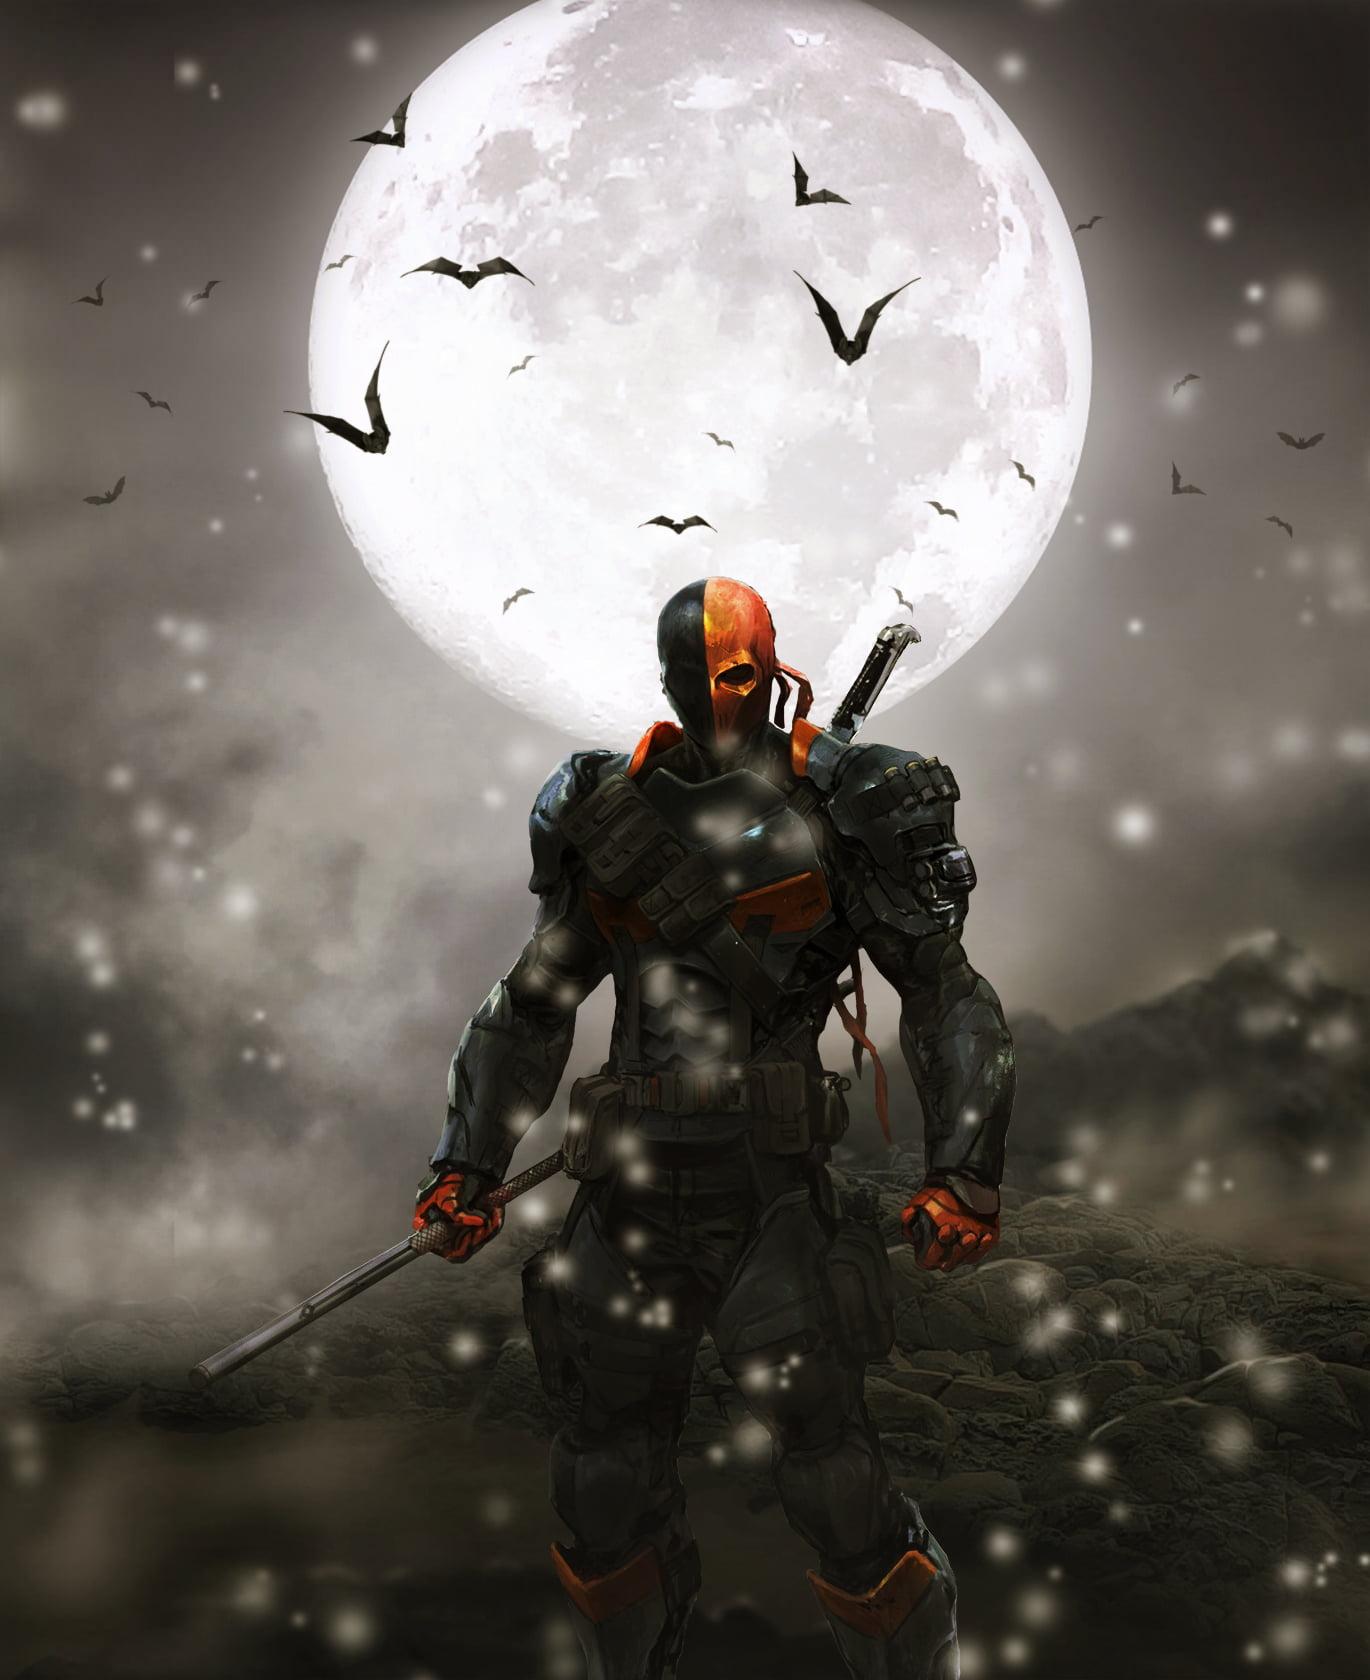 Deathstroke Art Wallpapers Wallpaper Cave Matching up deathstroke, the comics version and the tv. deathstroke art wallpapers wallpaper cave